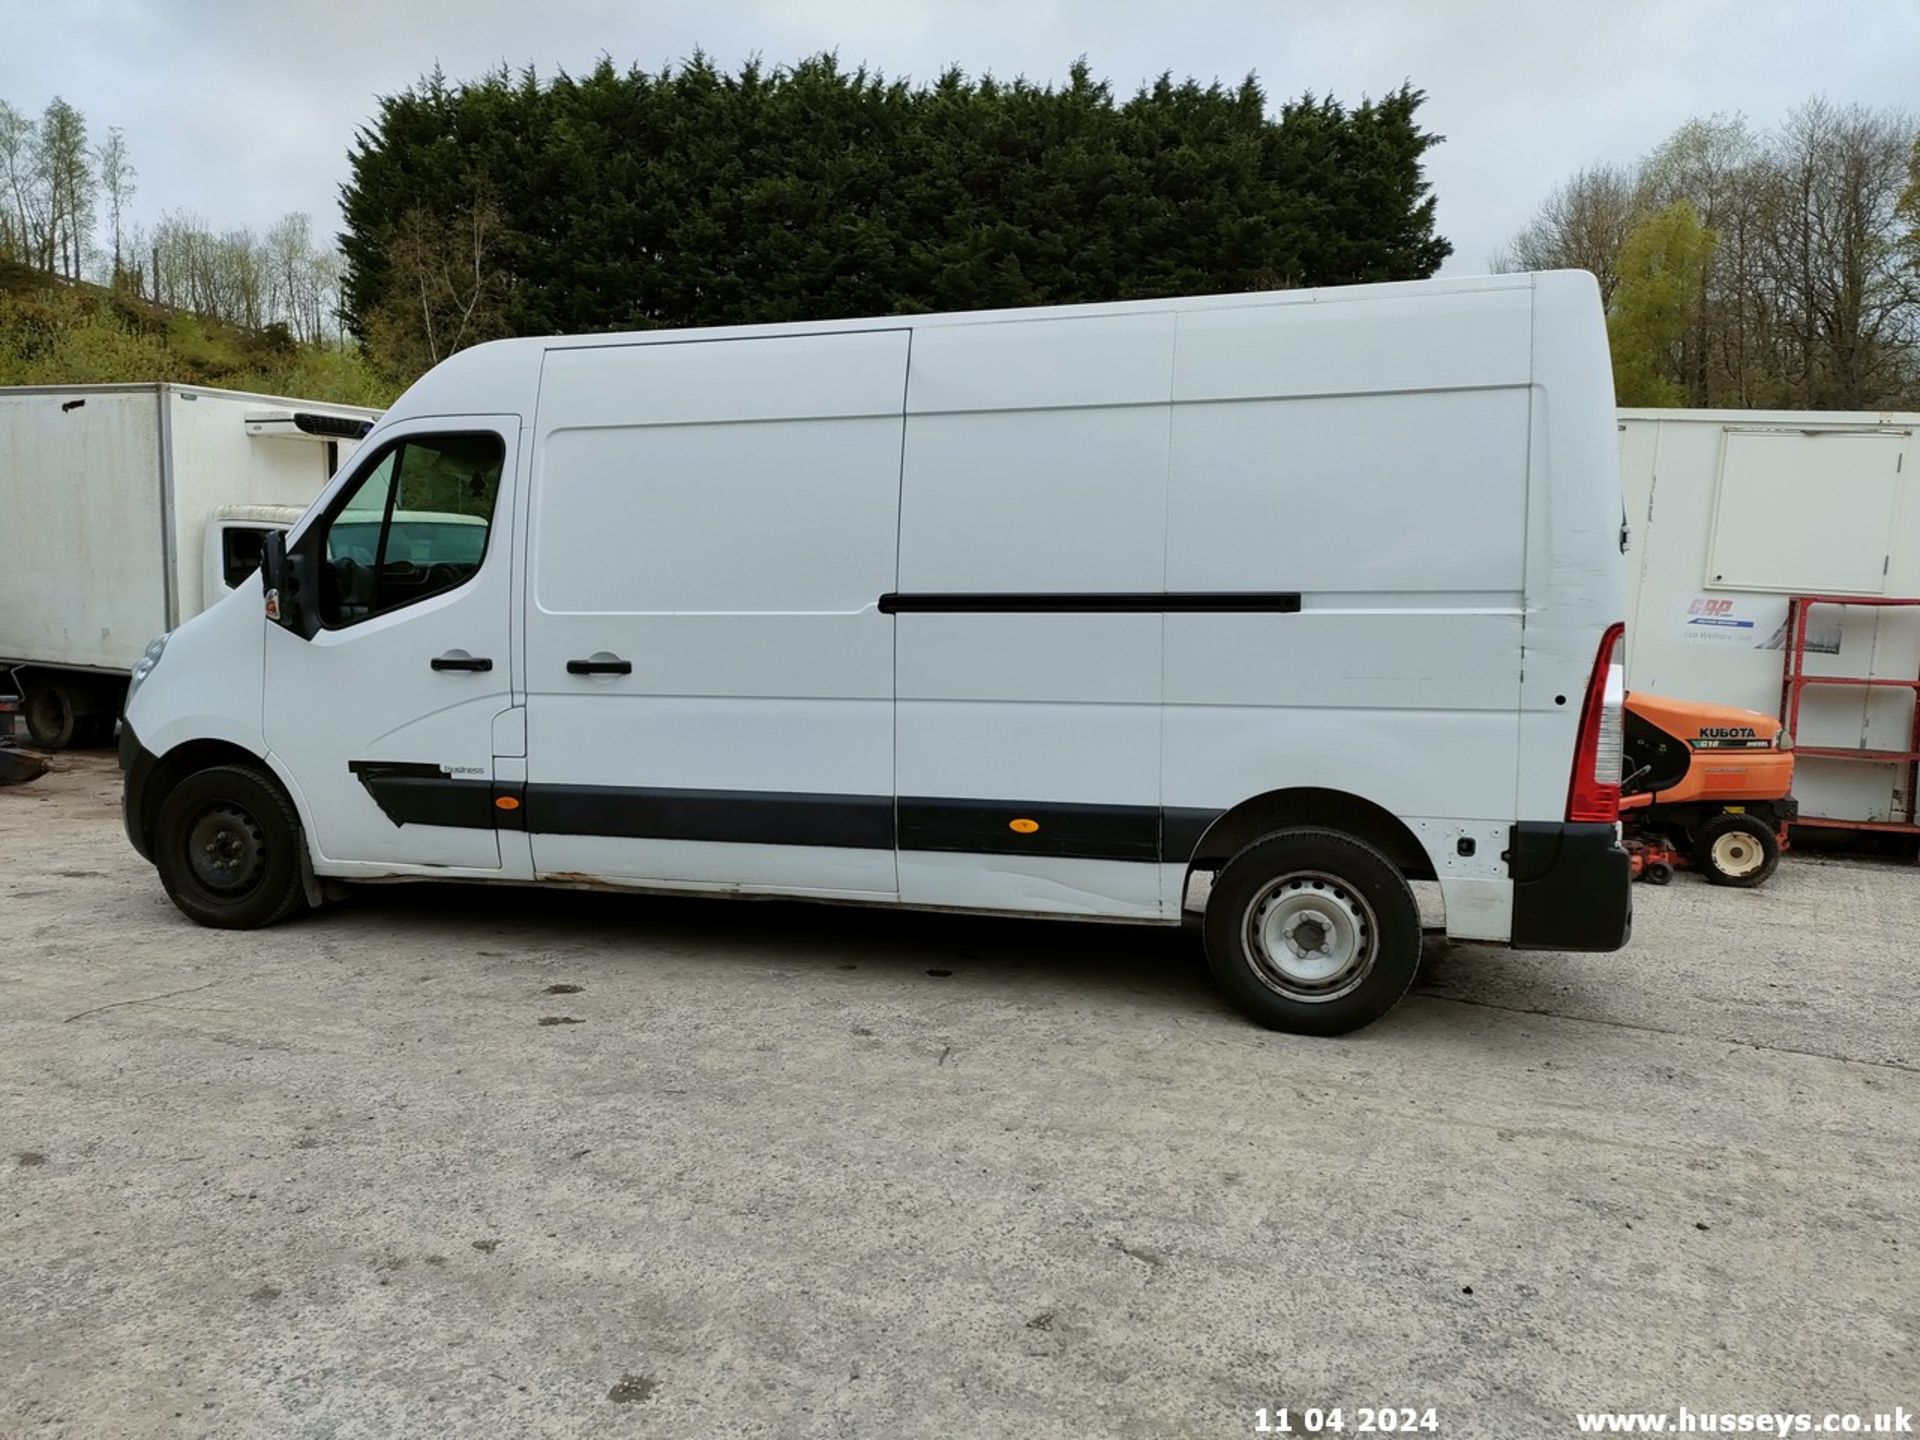 18/68 RENAULT MASTER LM35 BUSINESS DCI - 2298cc 5dr Van (White) - Image 22 of 68